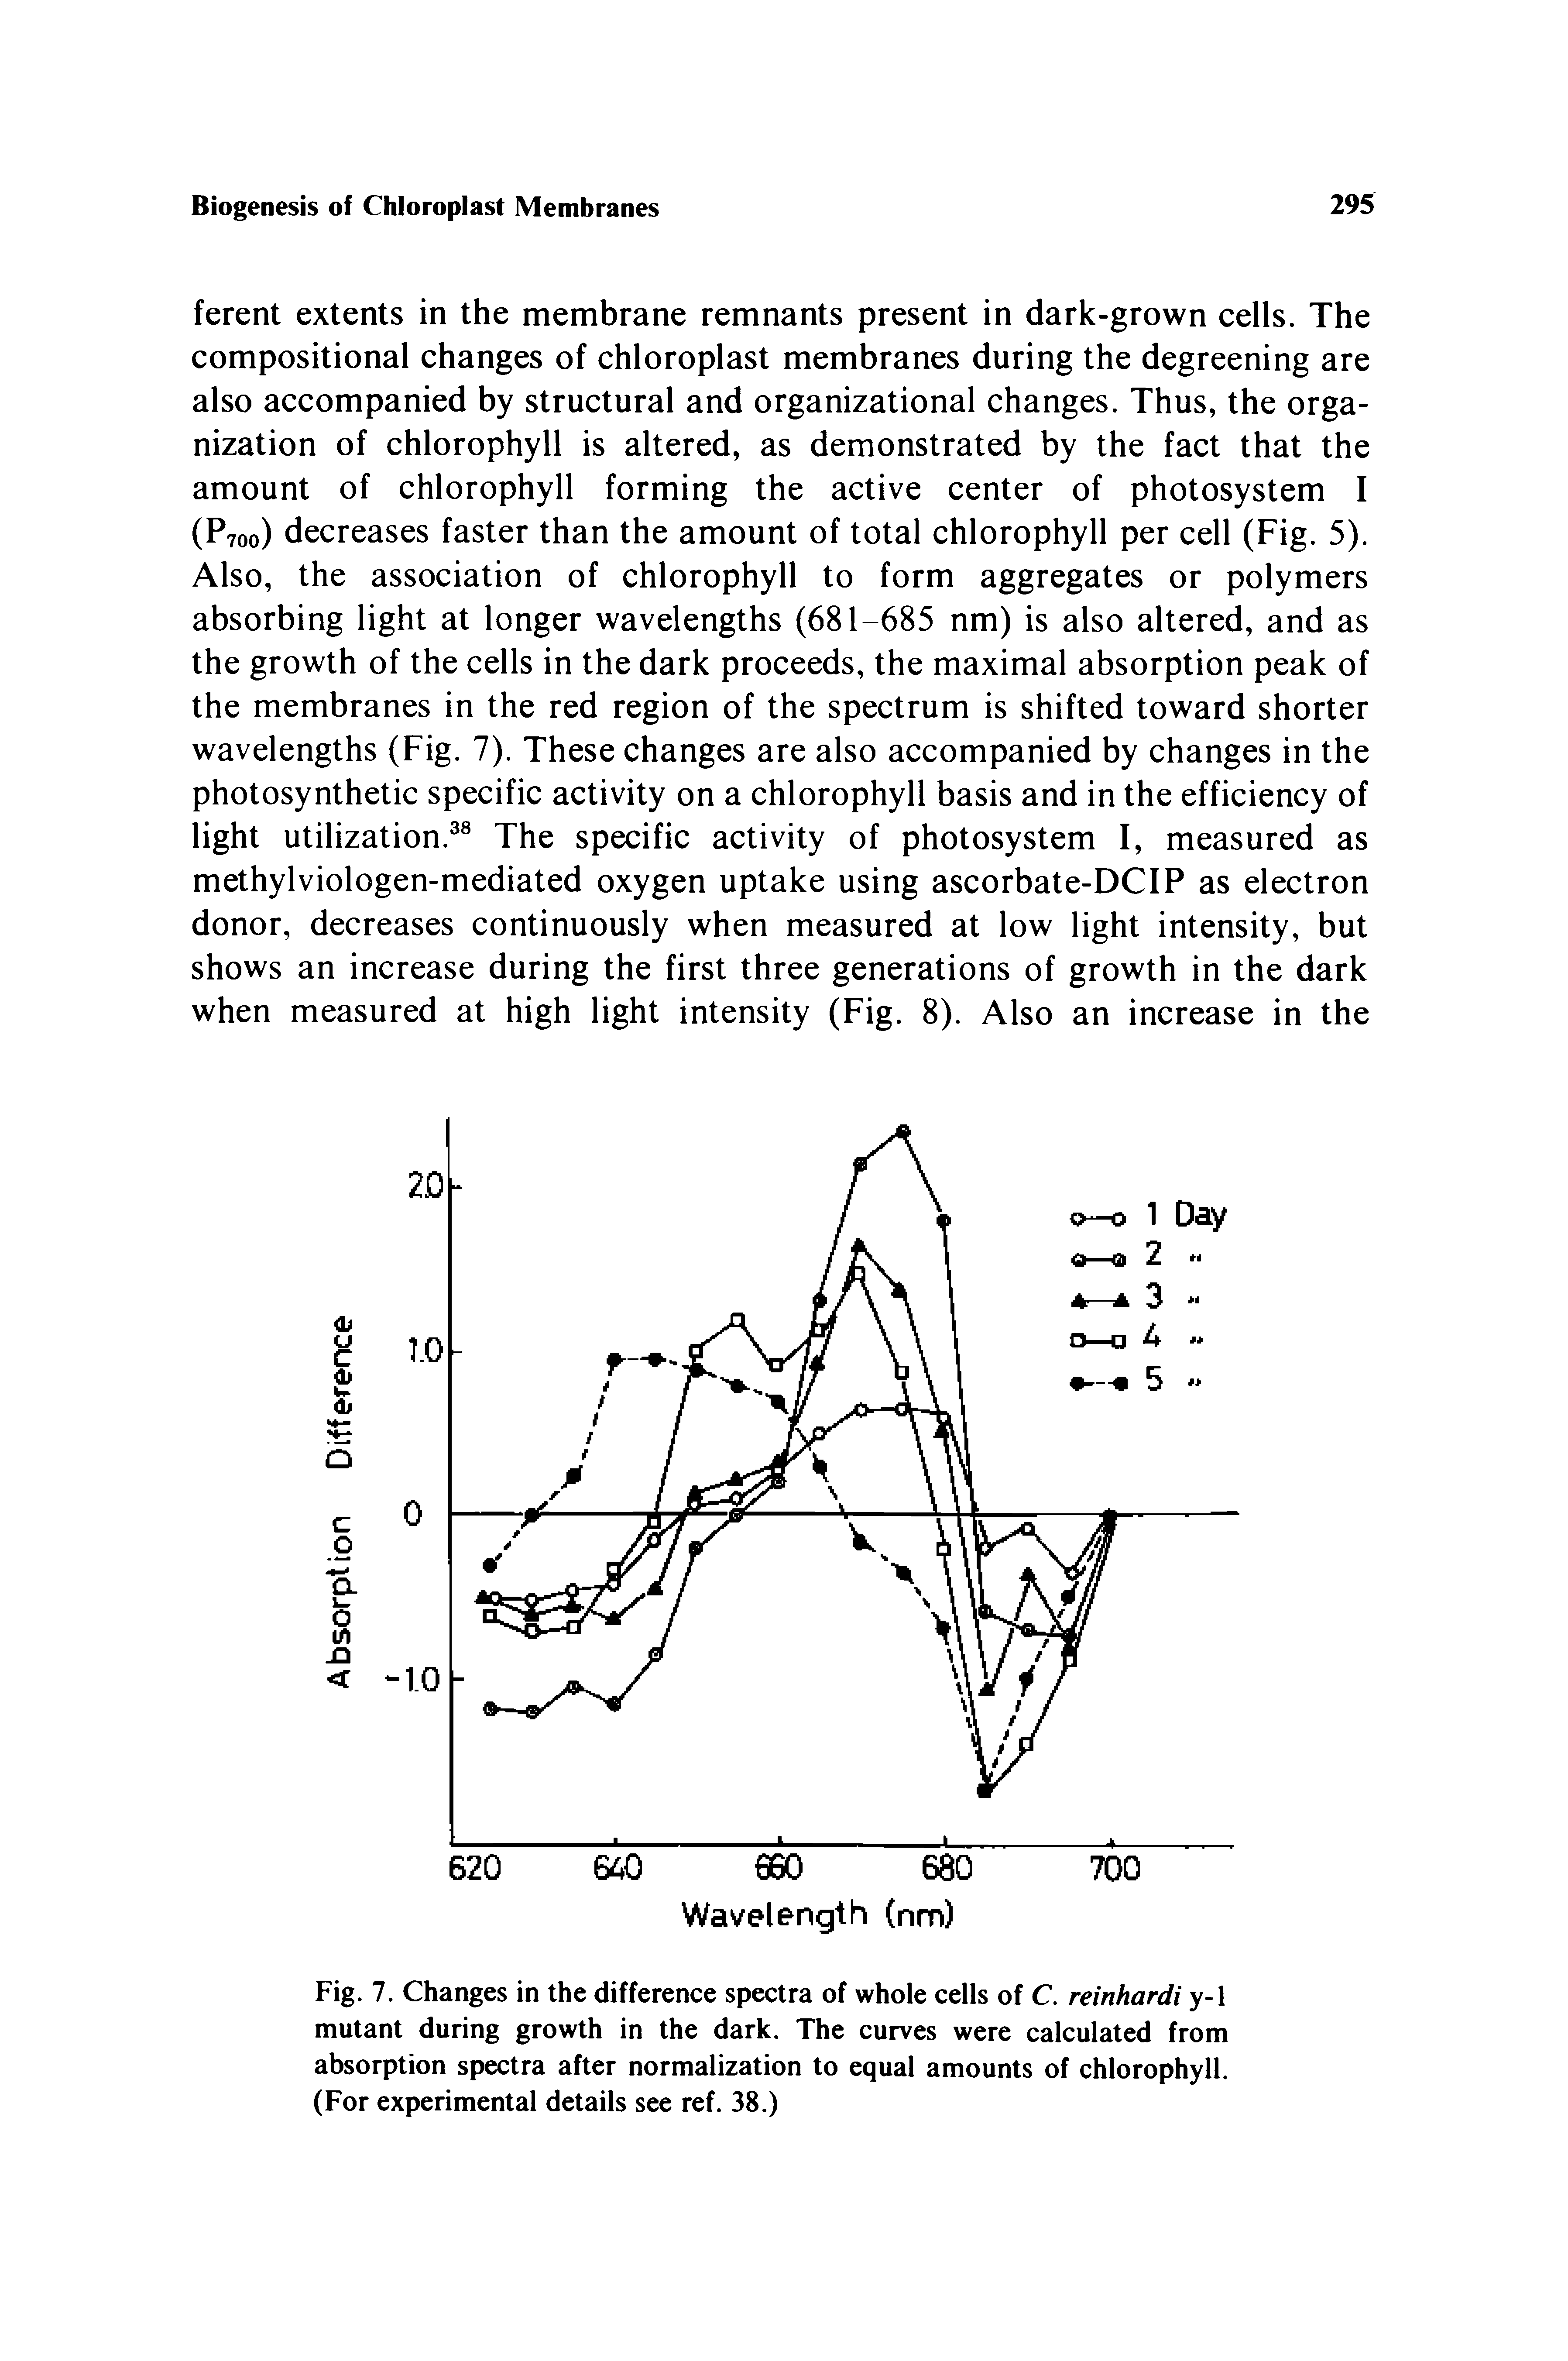 Fig. 7. Changes in the difference spectra of whole cells of C. reinhardi y-1 mutant during growth in the dark. The curves were calculated from absorption spectra after normalization to equal amounts of chlorophyll. (For experimental details see ref. 38.)...